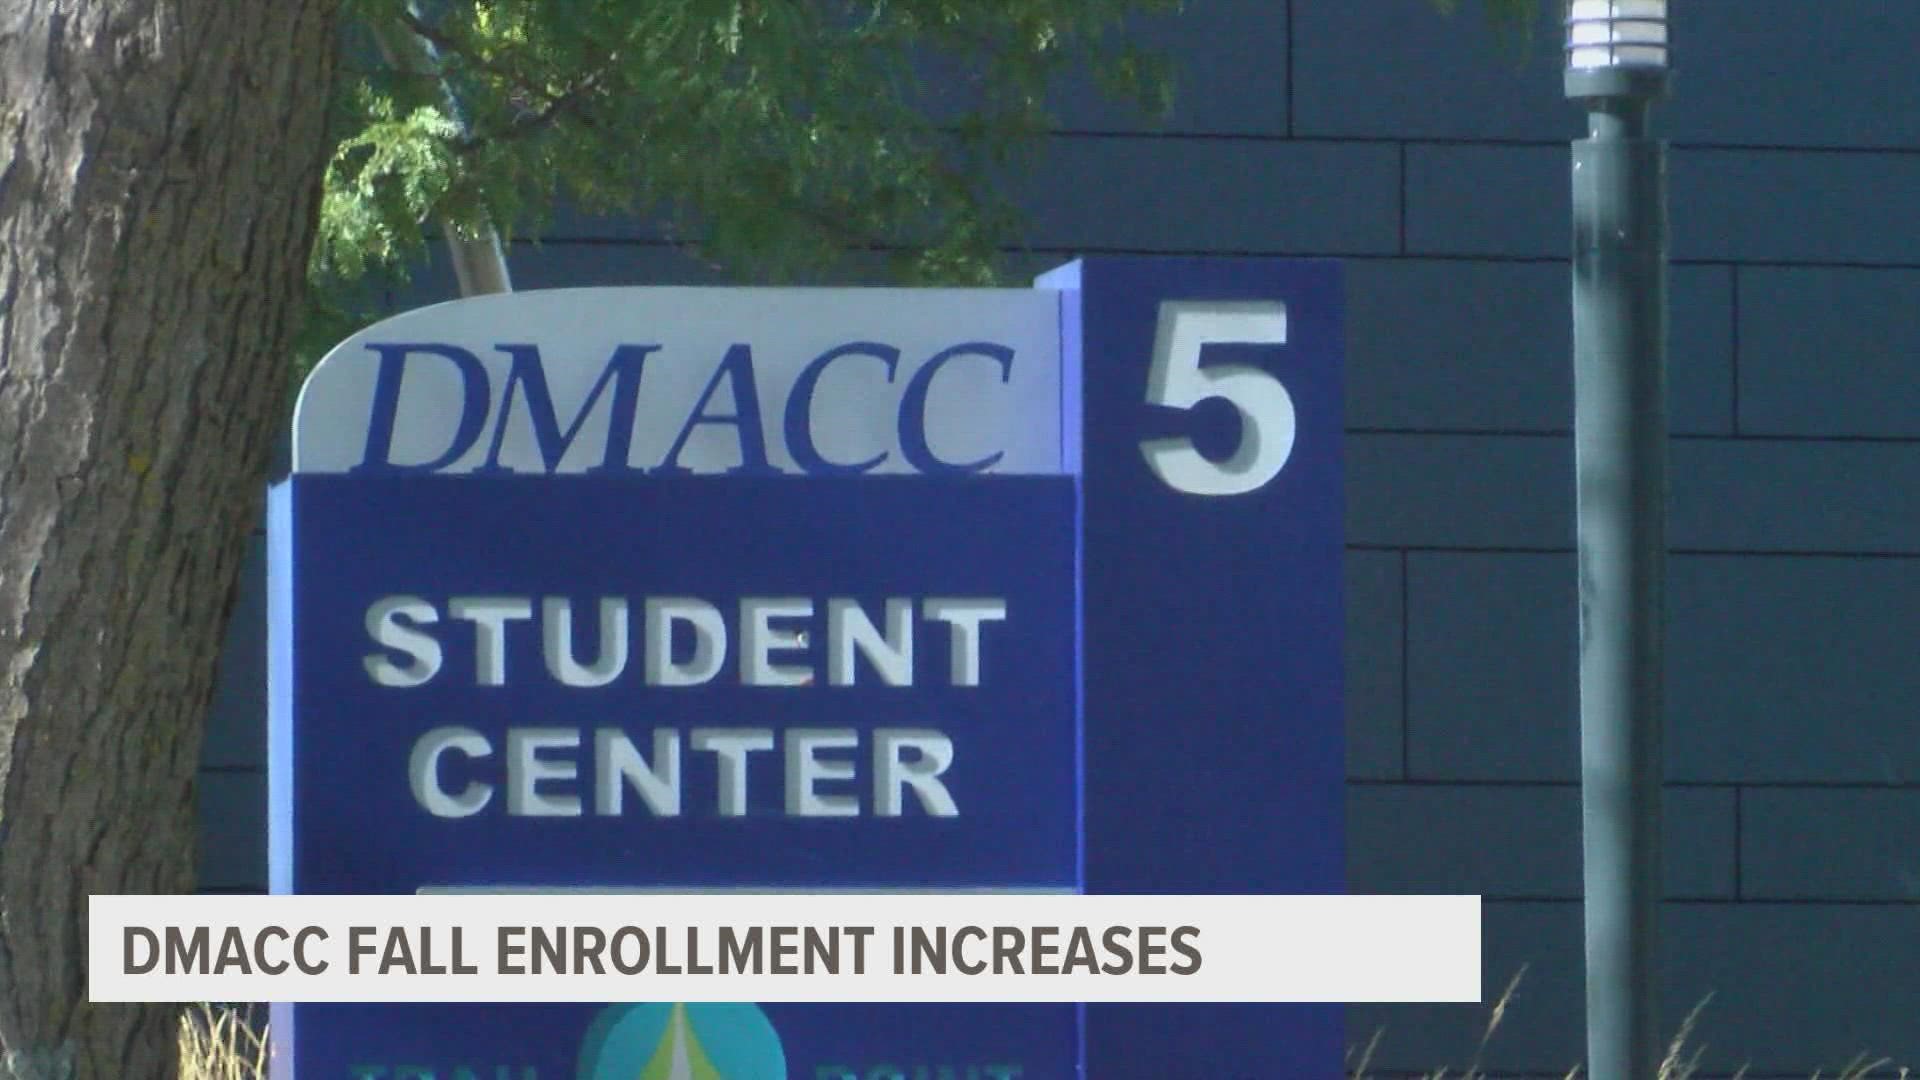 DMACC so far this semester, is seeing a 4.1% increase in enrollment this fall, compared to last fall.